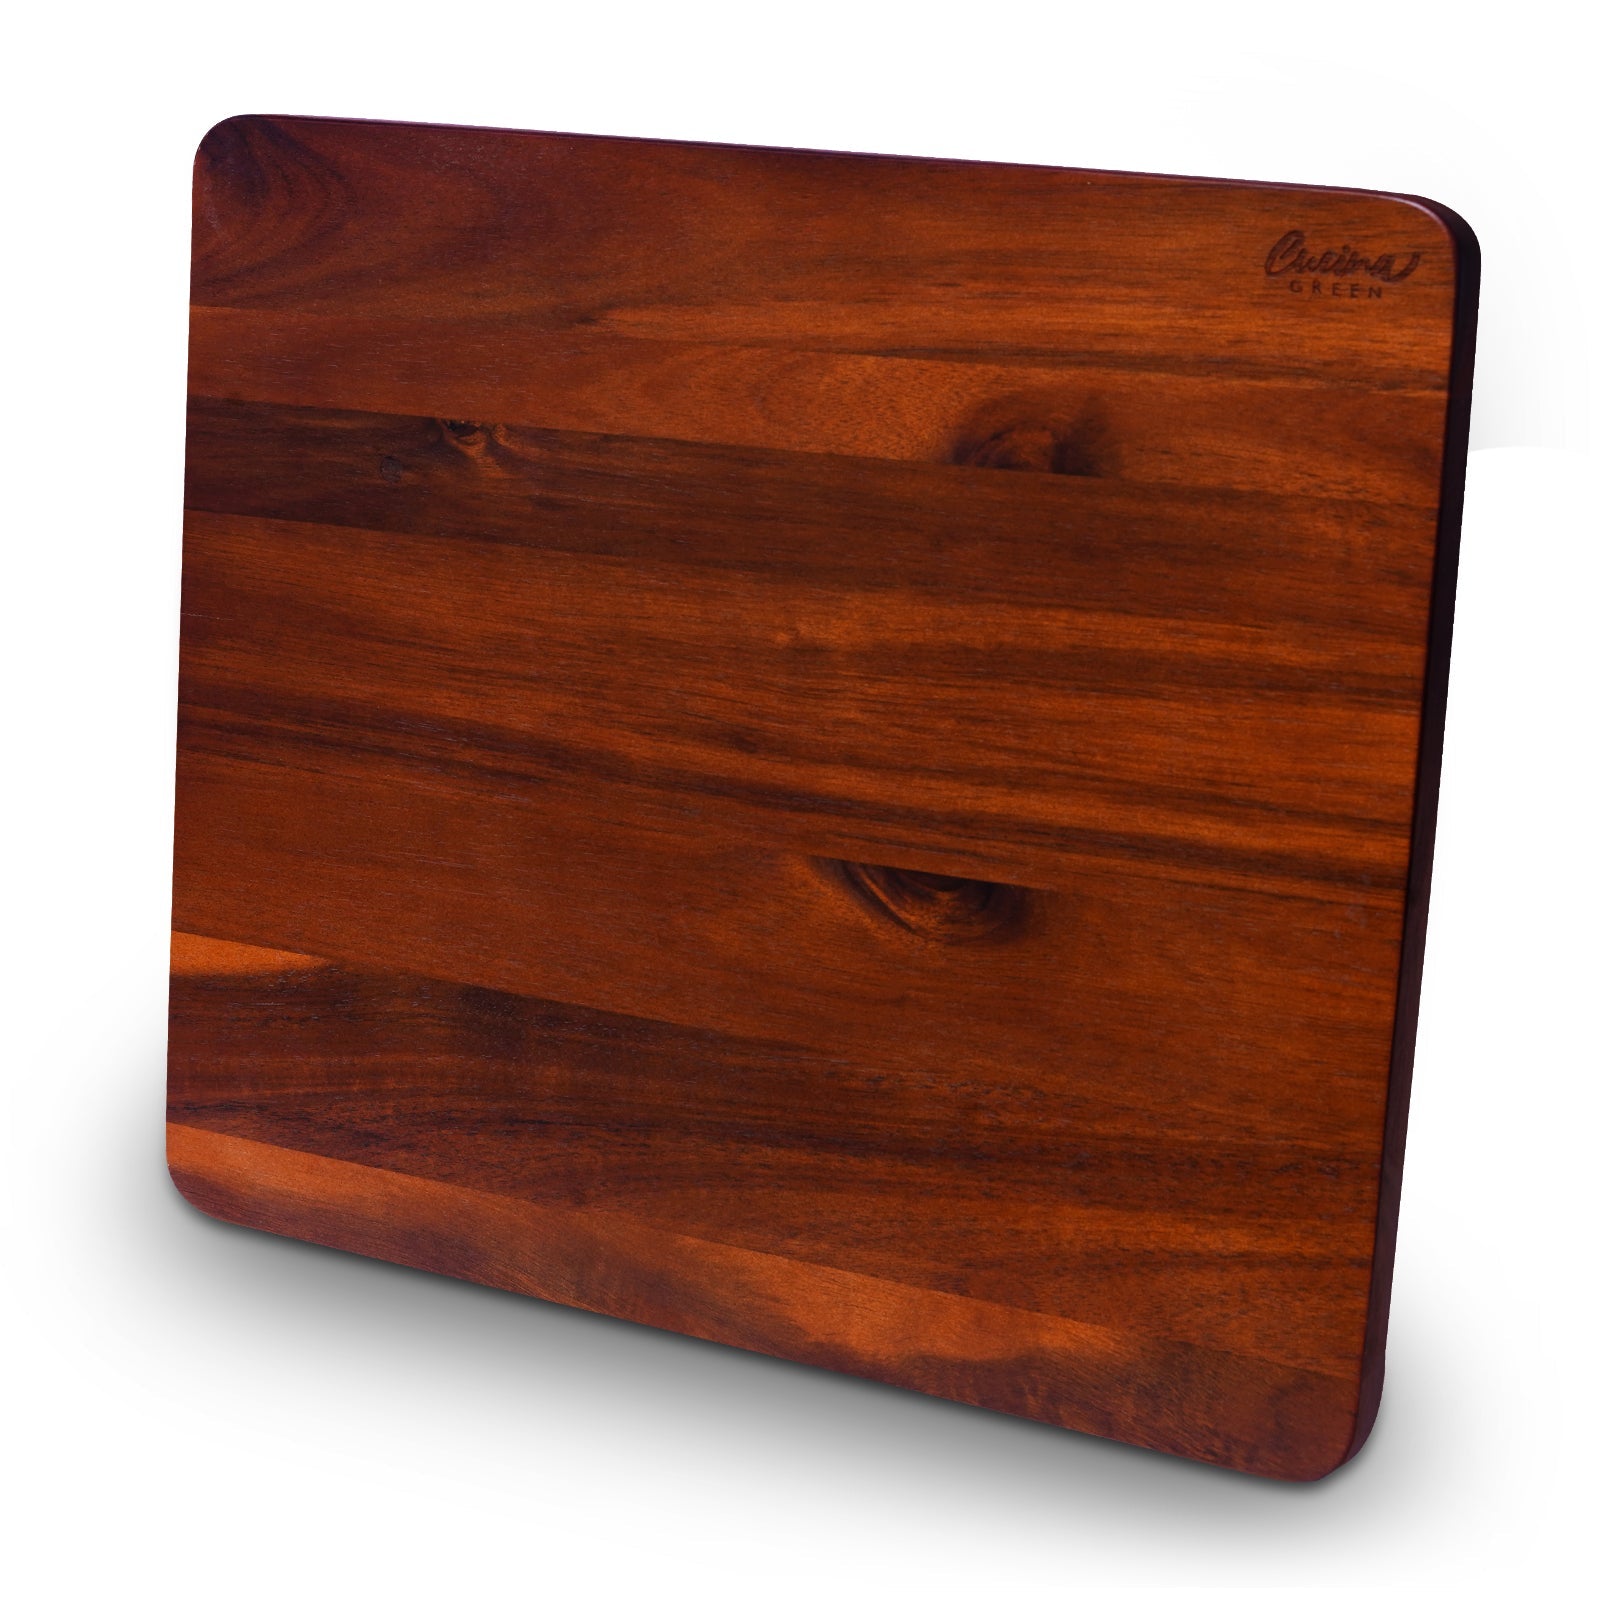 15 Inch RV Sink Cover and cutting board - Natural Acacia Wood